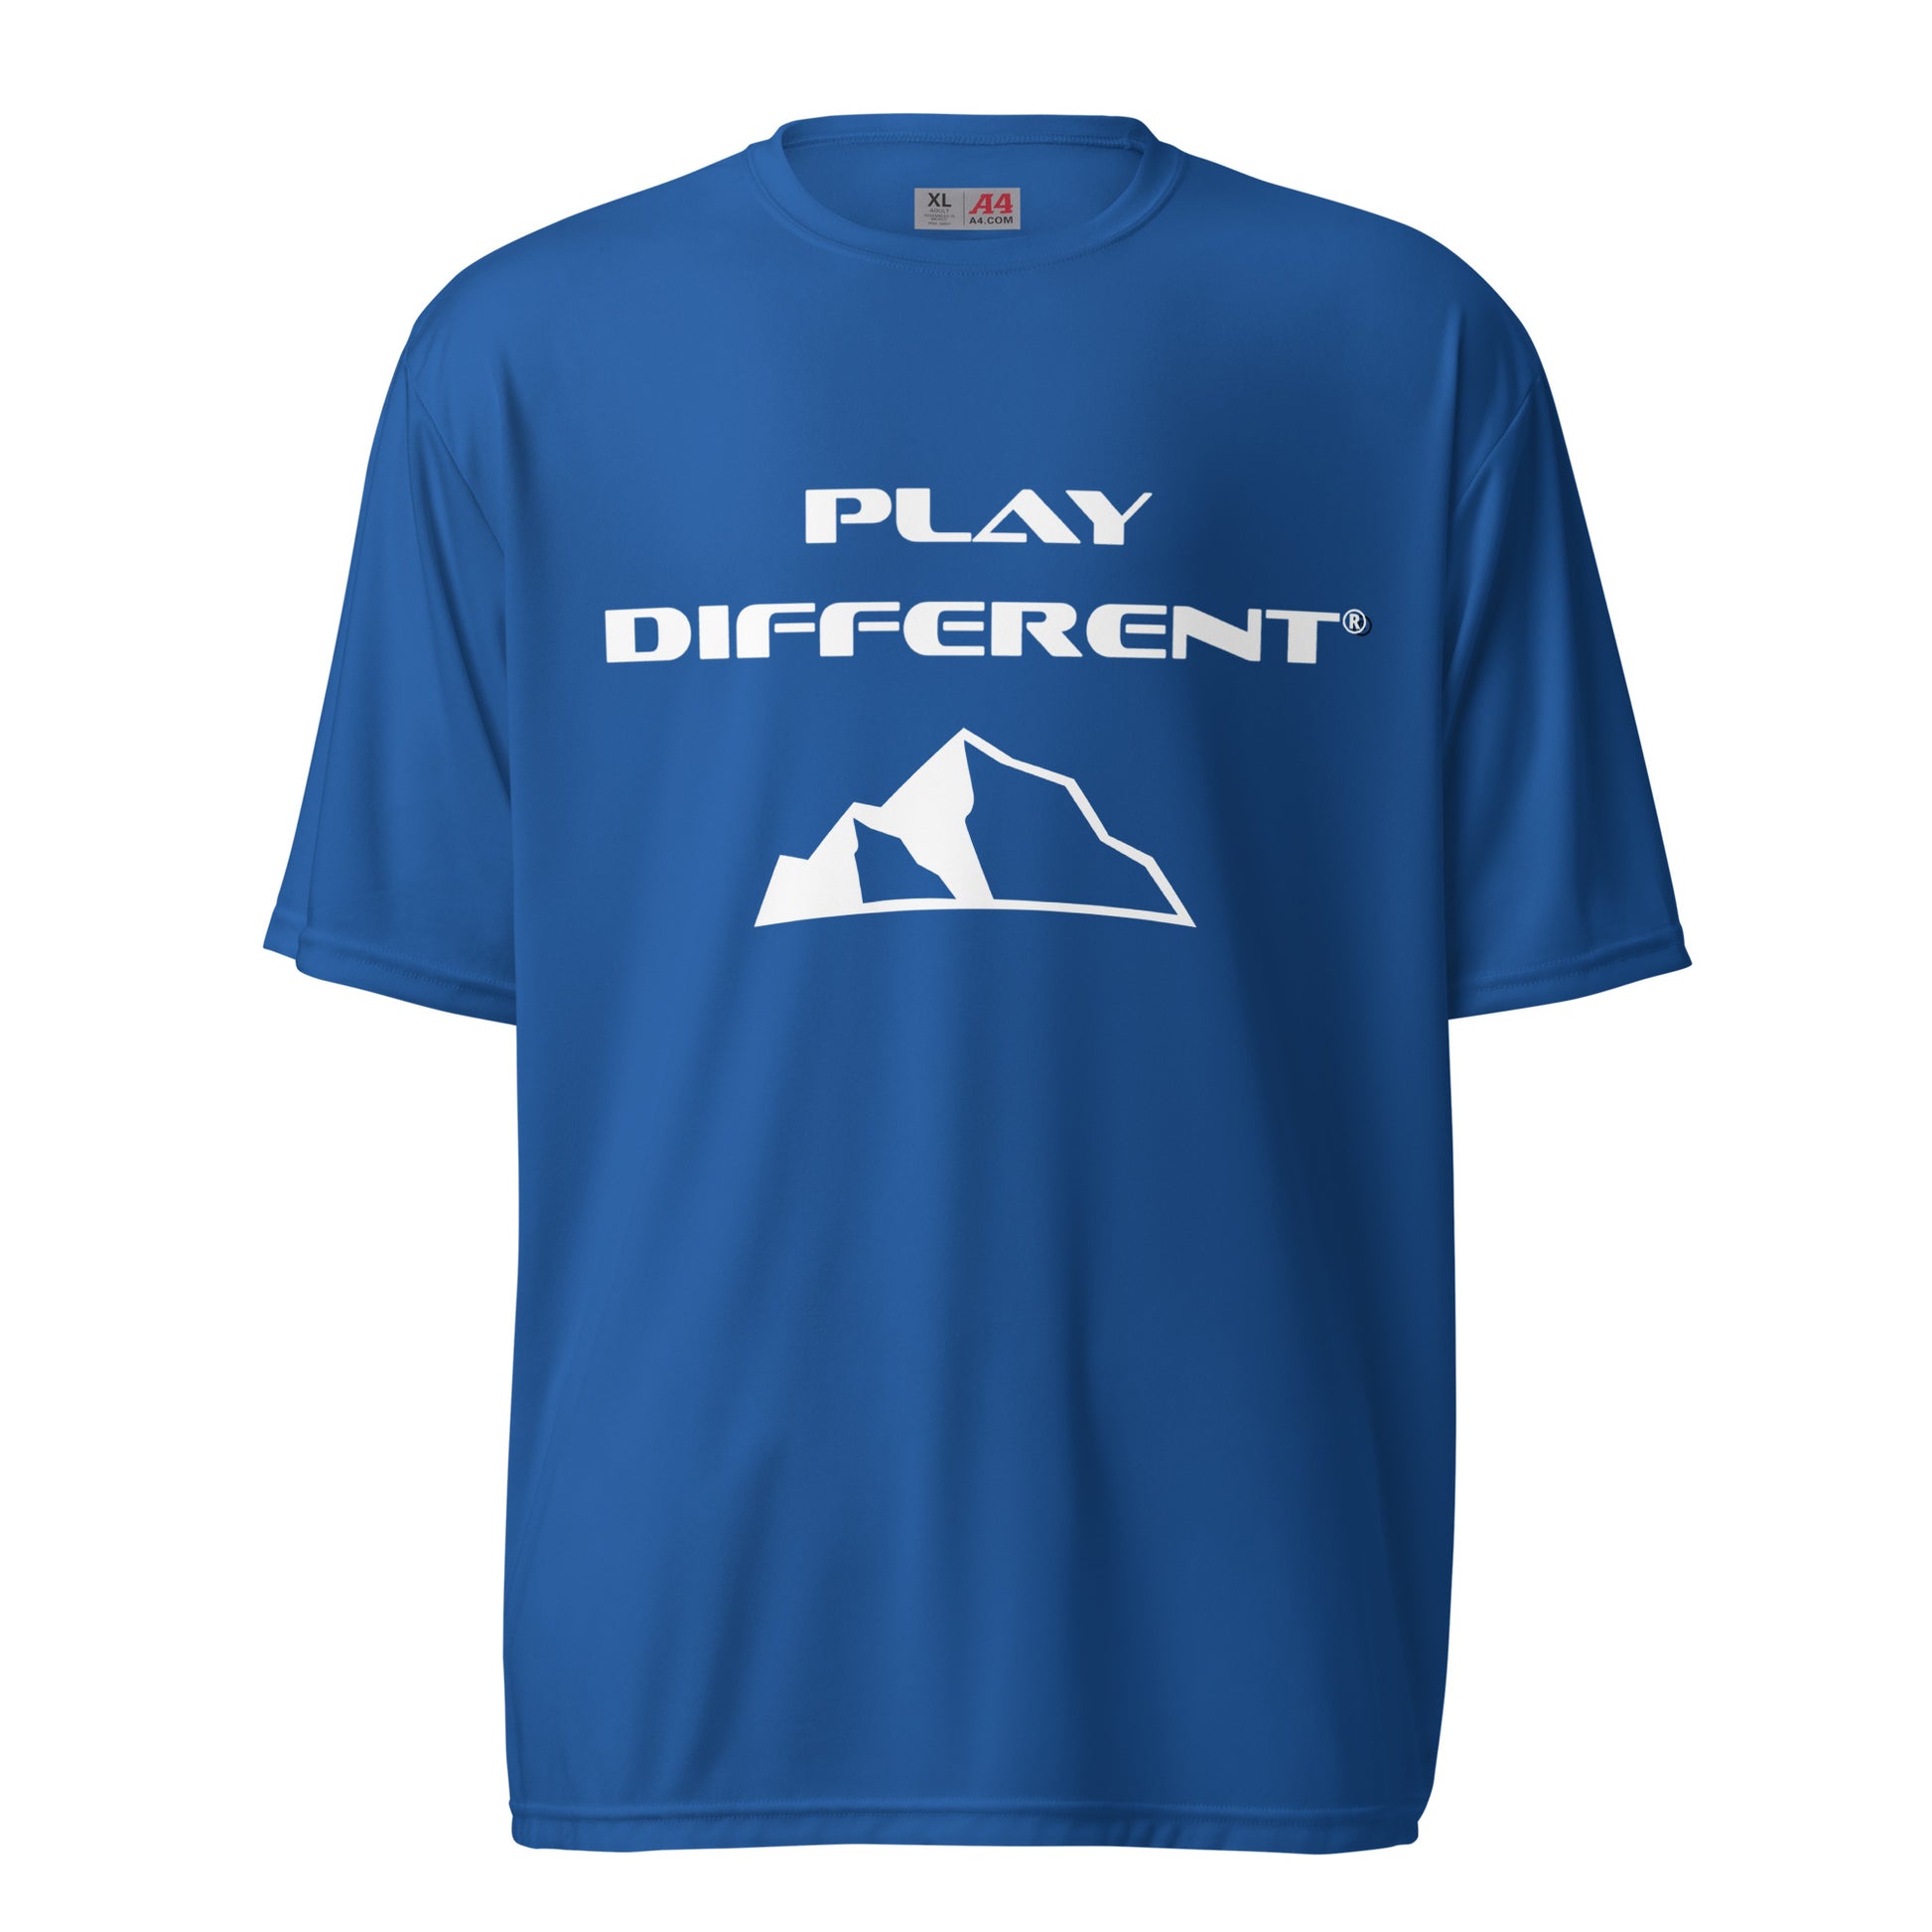 Play Different® Unisex performance crew neck t-shirt royal